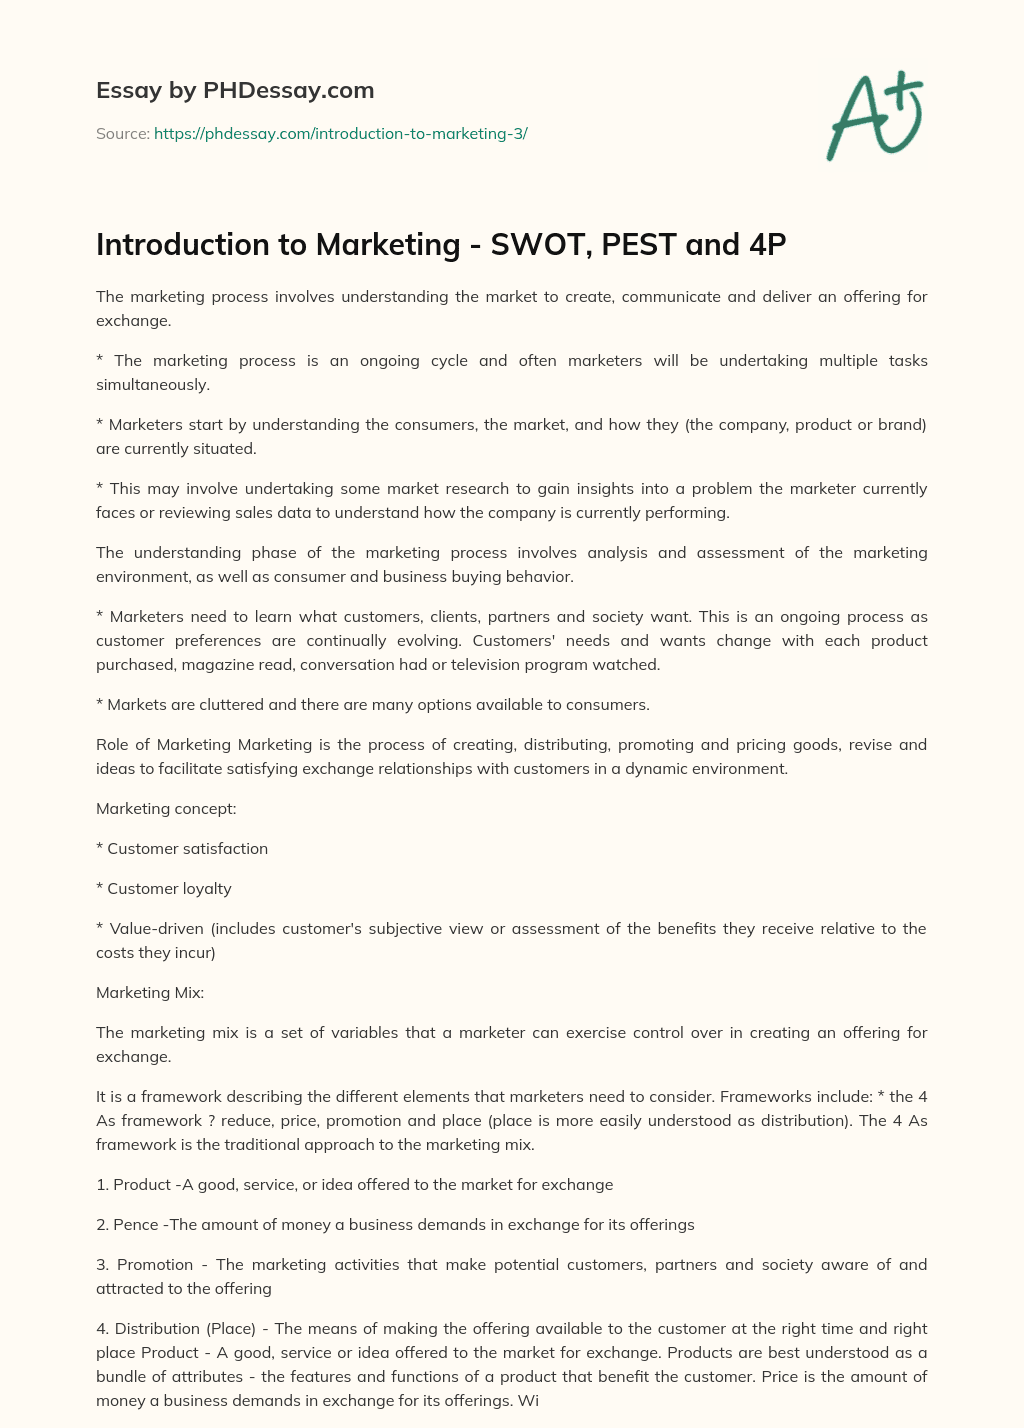 Introduction to Marketing – SWOT, PEST and 4P essay